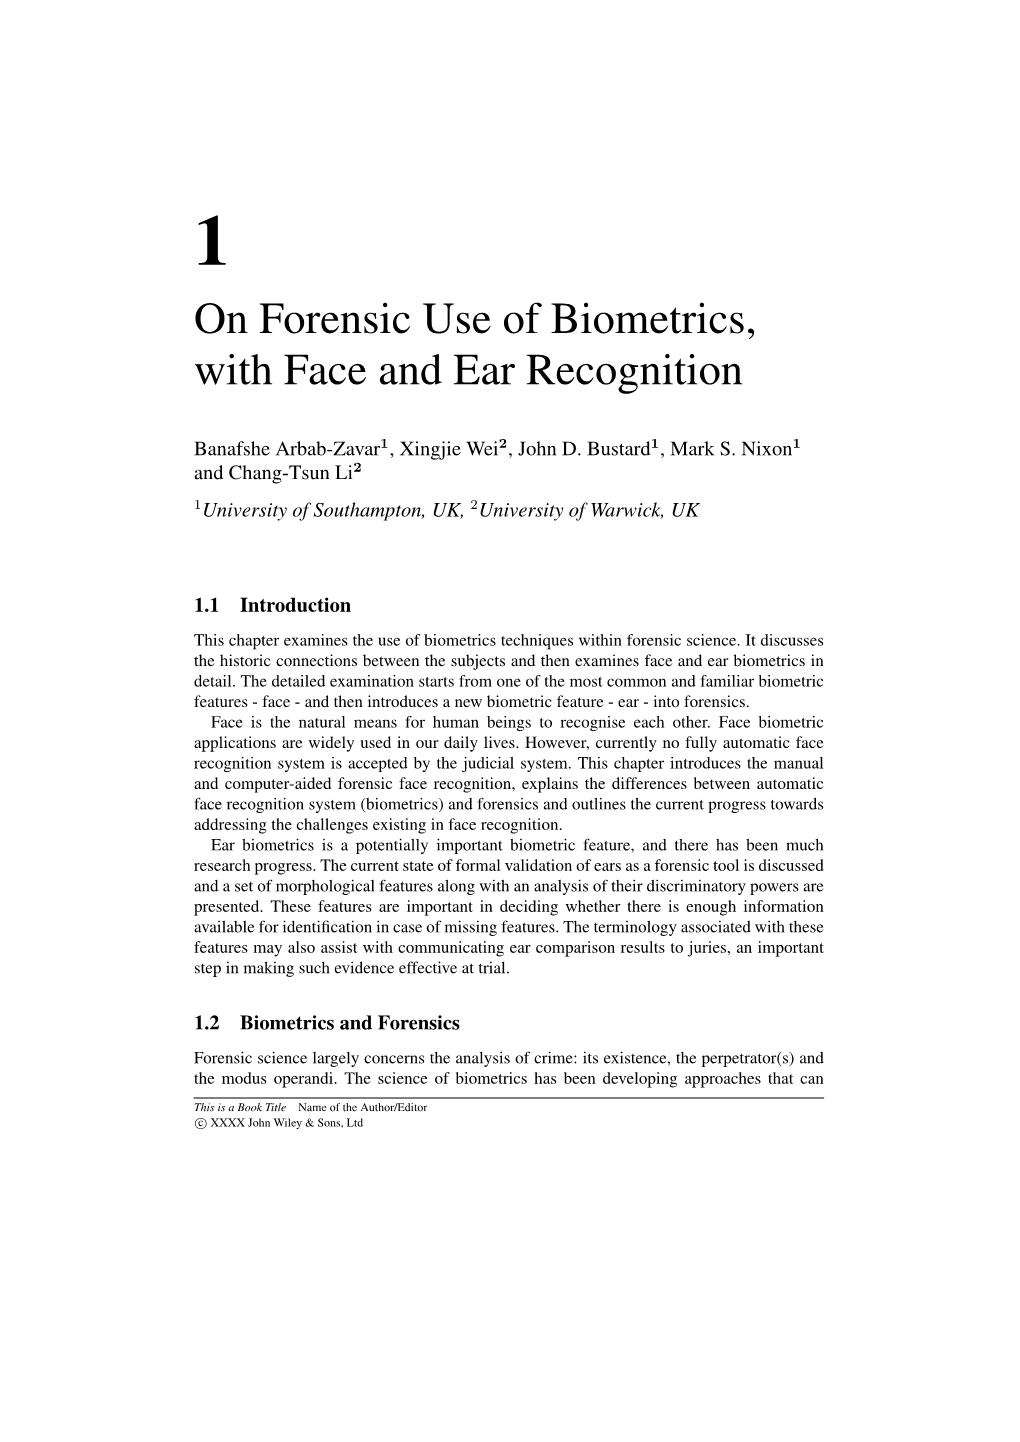 On Forensic Use of Biometrics, with Face and Ear Recognition